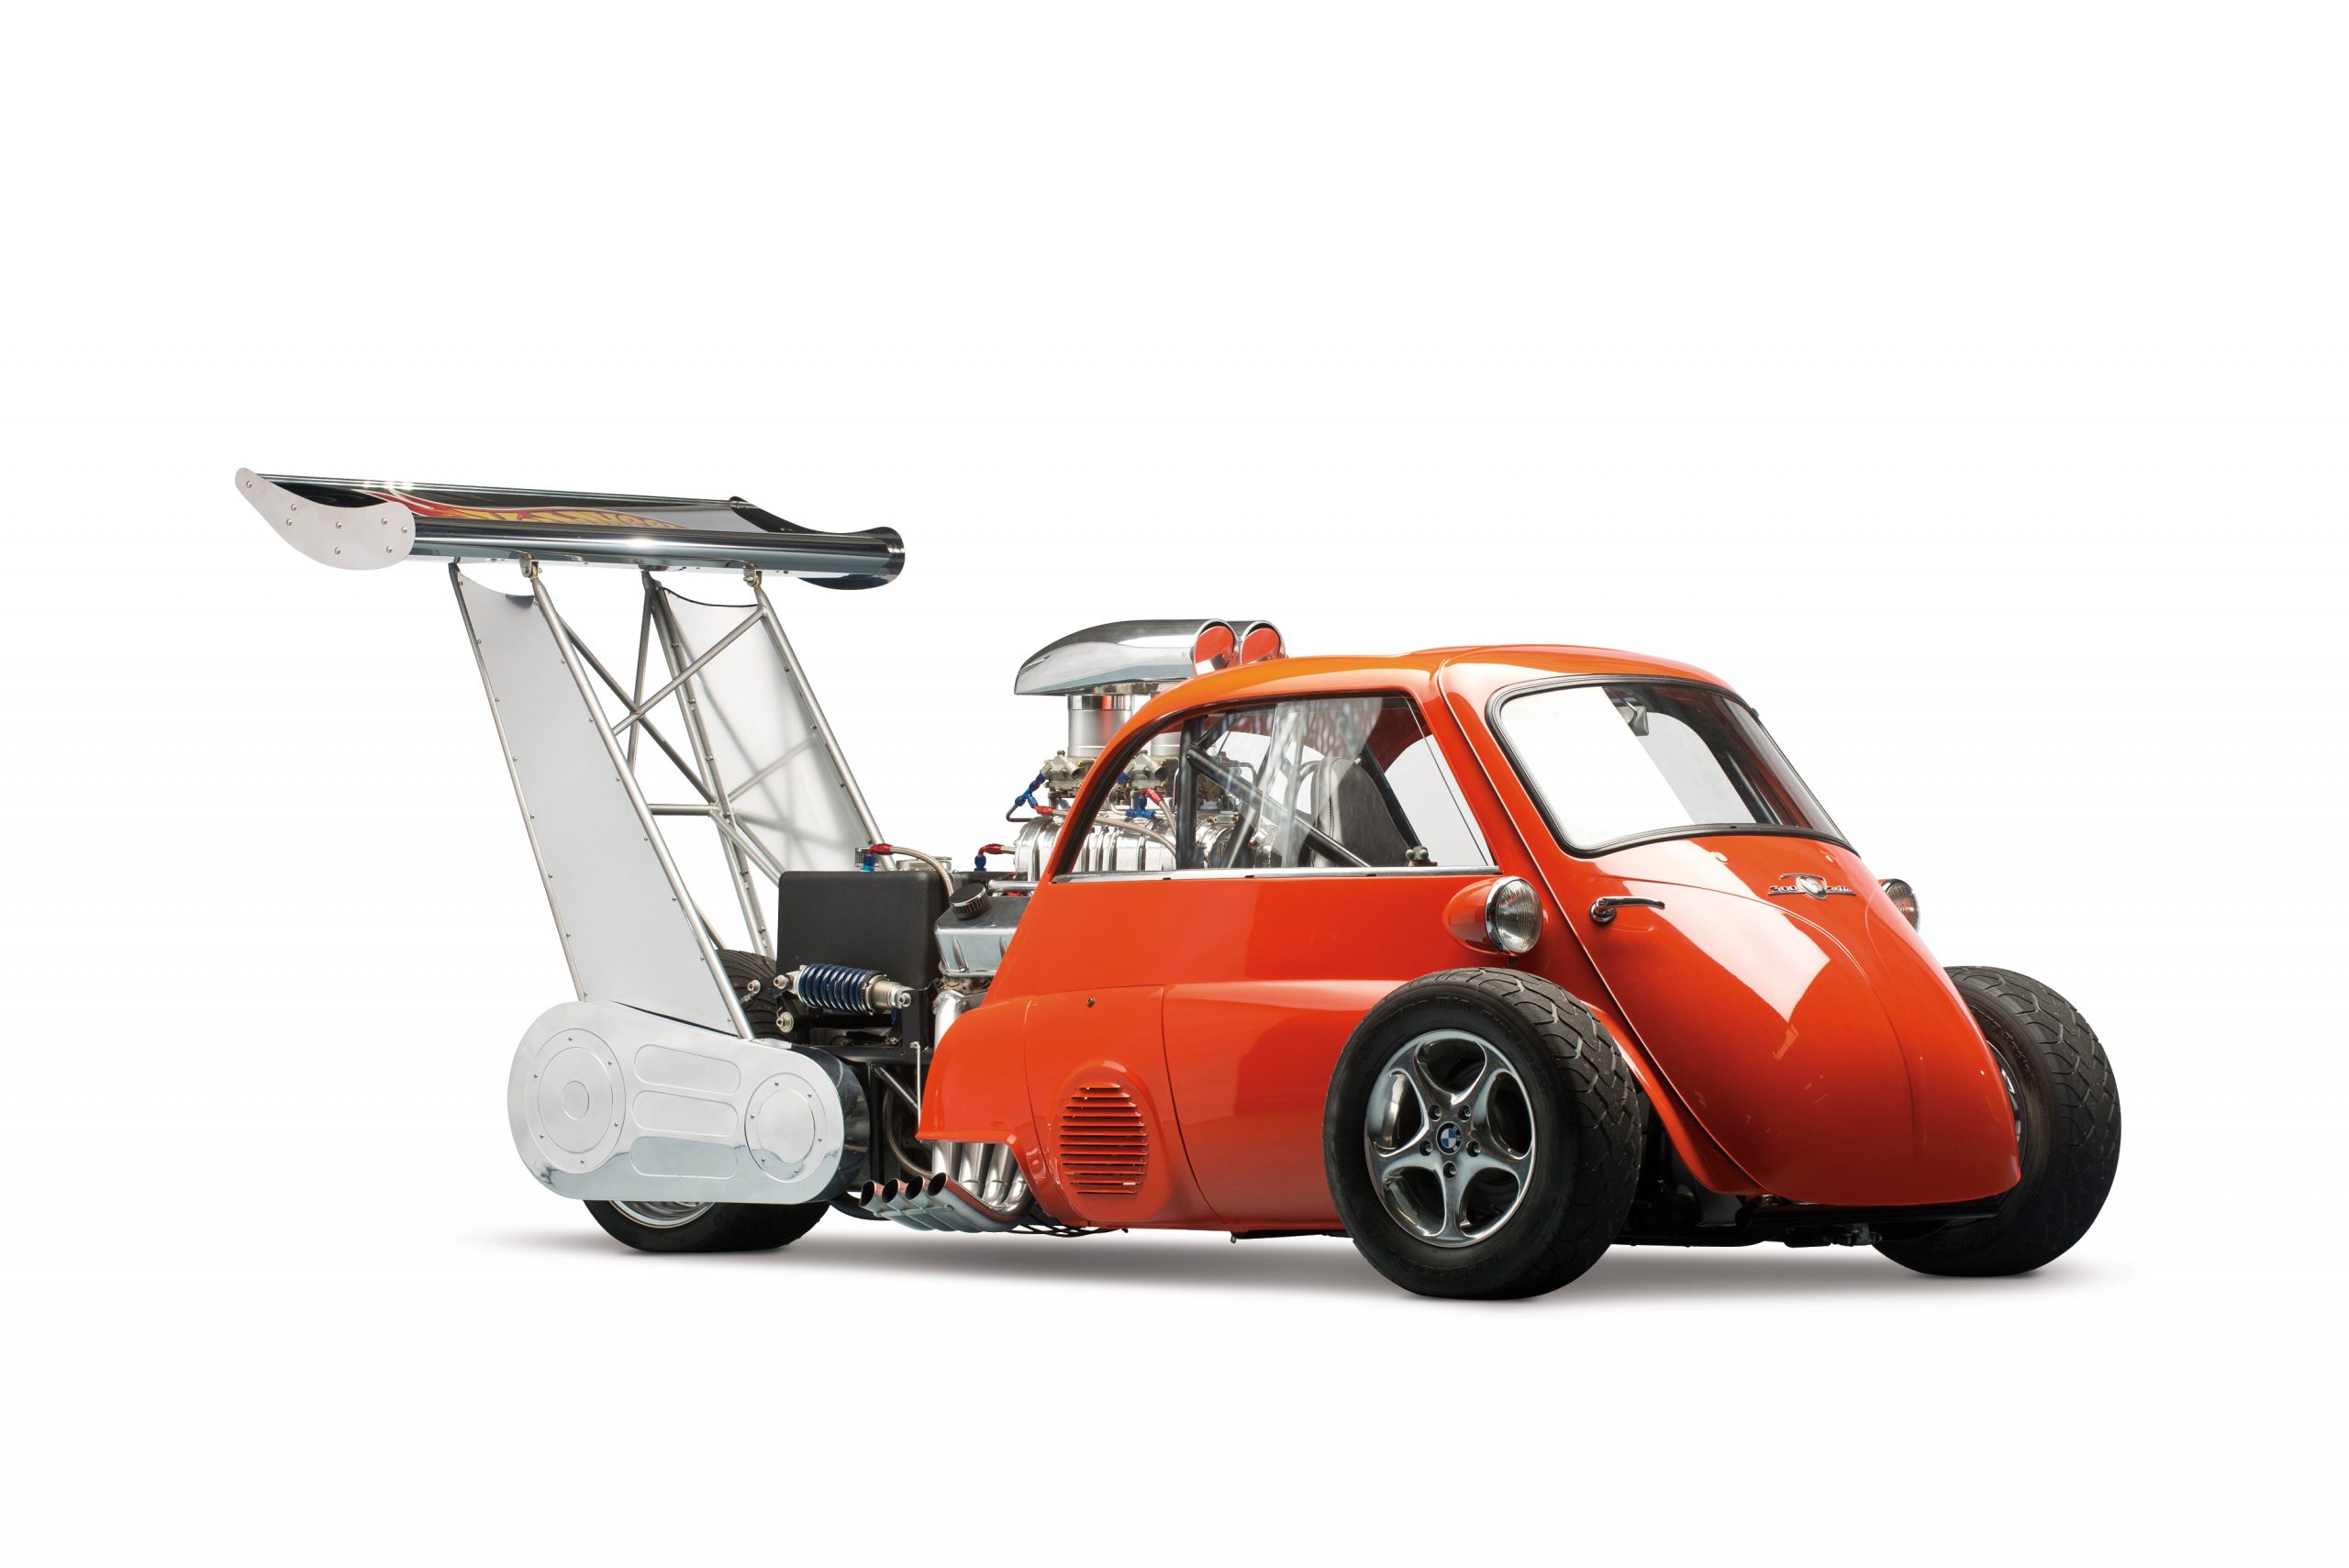 Take a moment to marvel at these BMW Isetta hot rods